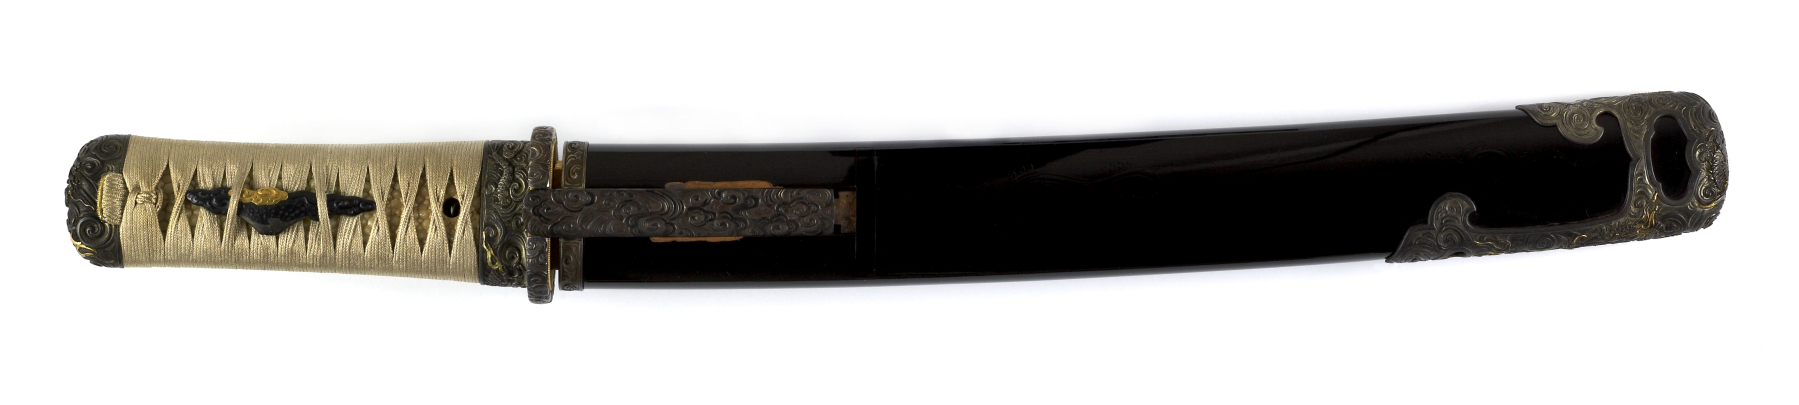 Image for Dagger (hamidashi) with black lacquer saya decorated  with raised dragons, (includes 51.1281.1-51.1281.3)